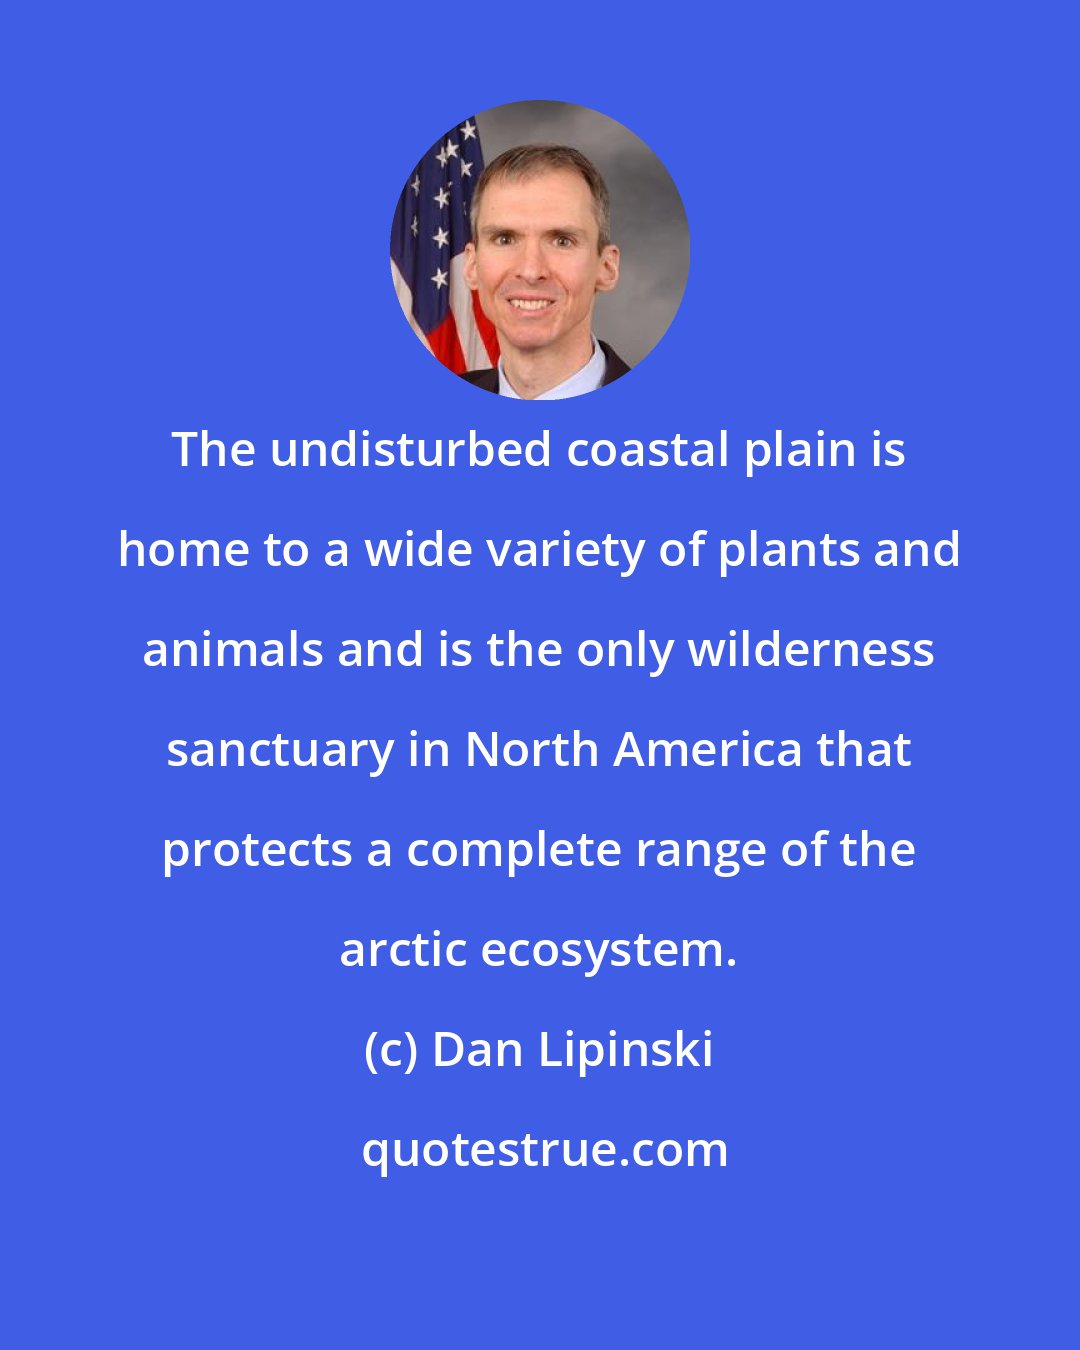 Dan Lipinski: The undisturbed coastal plain is home to a wide variety of plants and animals and is the only wilderness sanctuary in North America that protects a complete range of the arctic ecosystem.